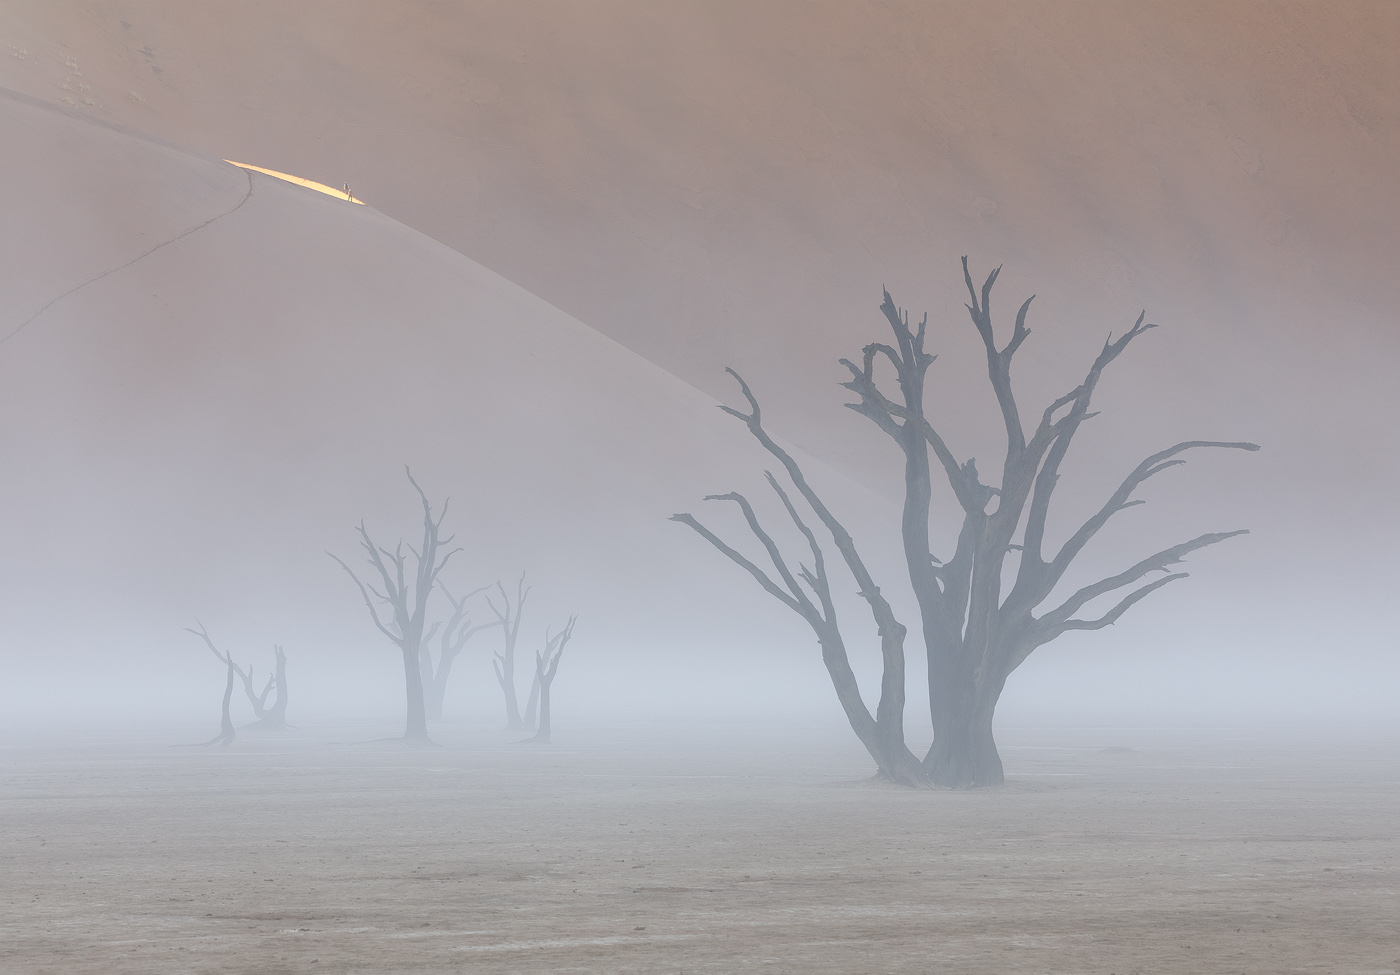 An image I took on a magical, foggy morning in Deadvlei, Namibia. Even though the conditions are very rare and beautiful, this composition is not original. Indeed, original compositions in such limited photo locations are incredibly hard to produce. I will discuss ways to overcome this below. <br>Canon EOS 5D Mark IV, Canon 70–300mm, f/13, 1/13 sec, ISO 100 <br>Deadvlei, Namibia